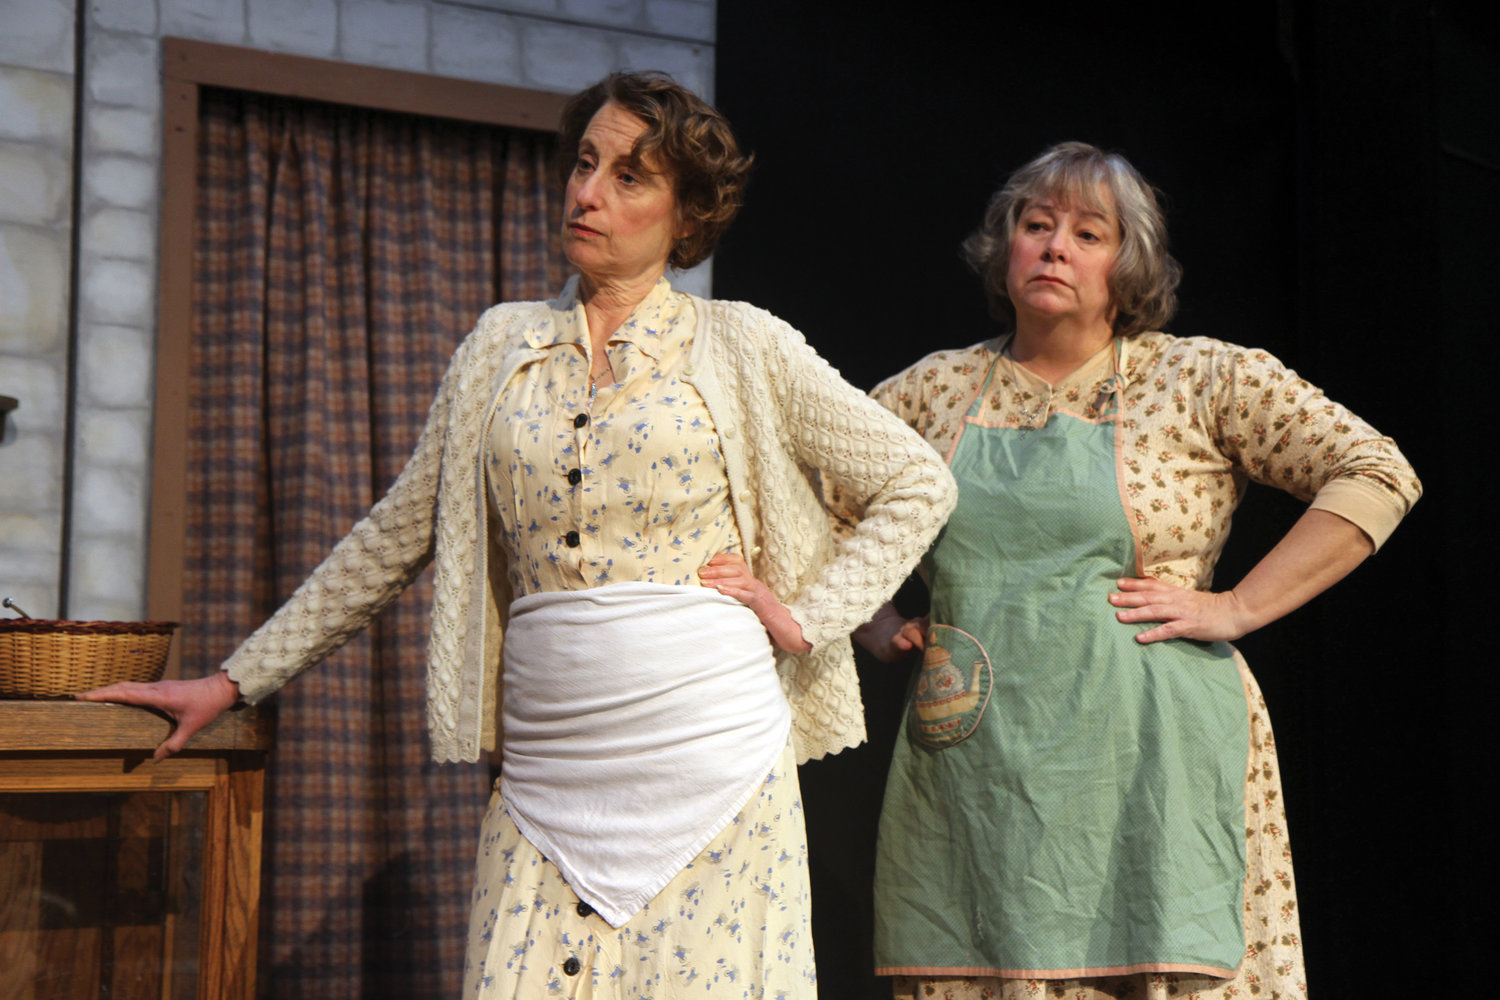 Michelle Hensel, as Auntie Kate, left, and, Jennifer Nielsen, as Auntie Eileen, give their best motherly scowls during a recent dress rehearsal.